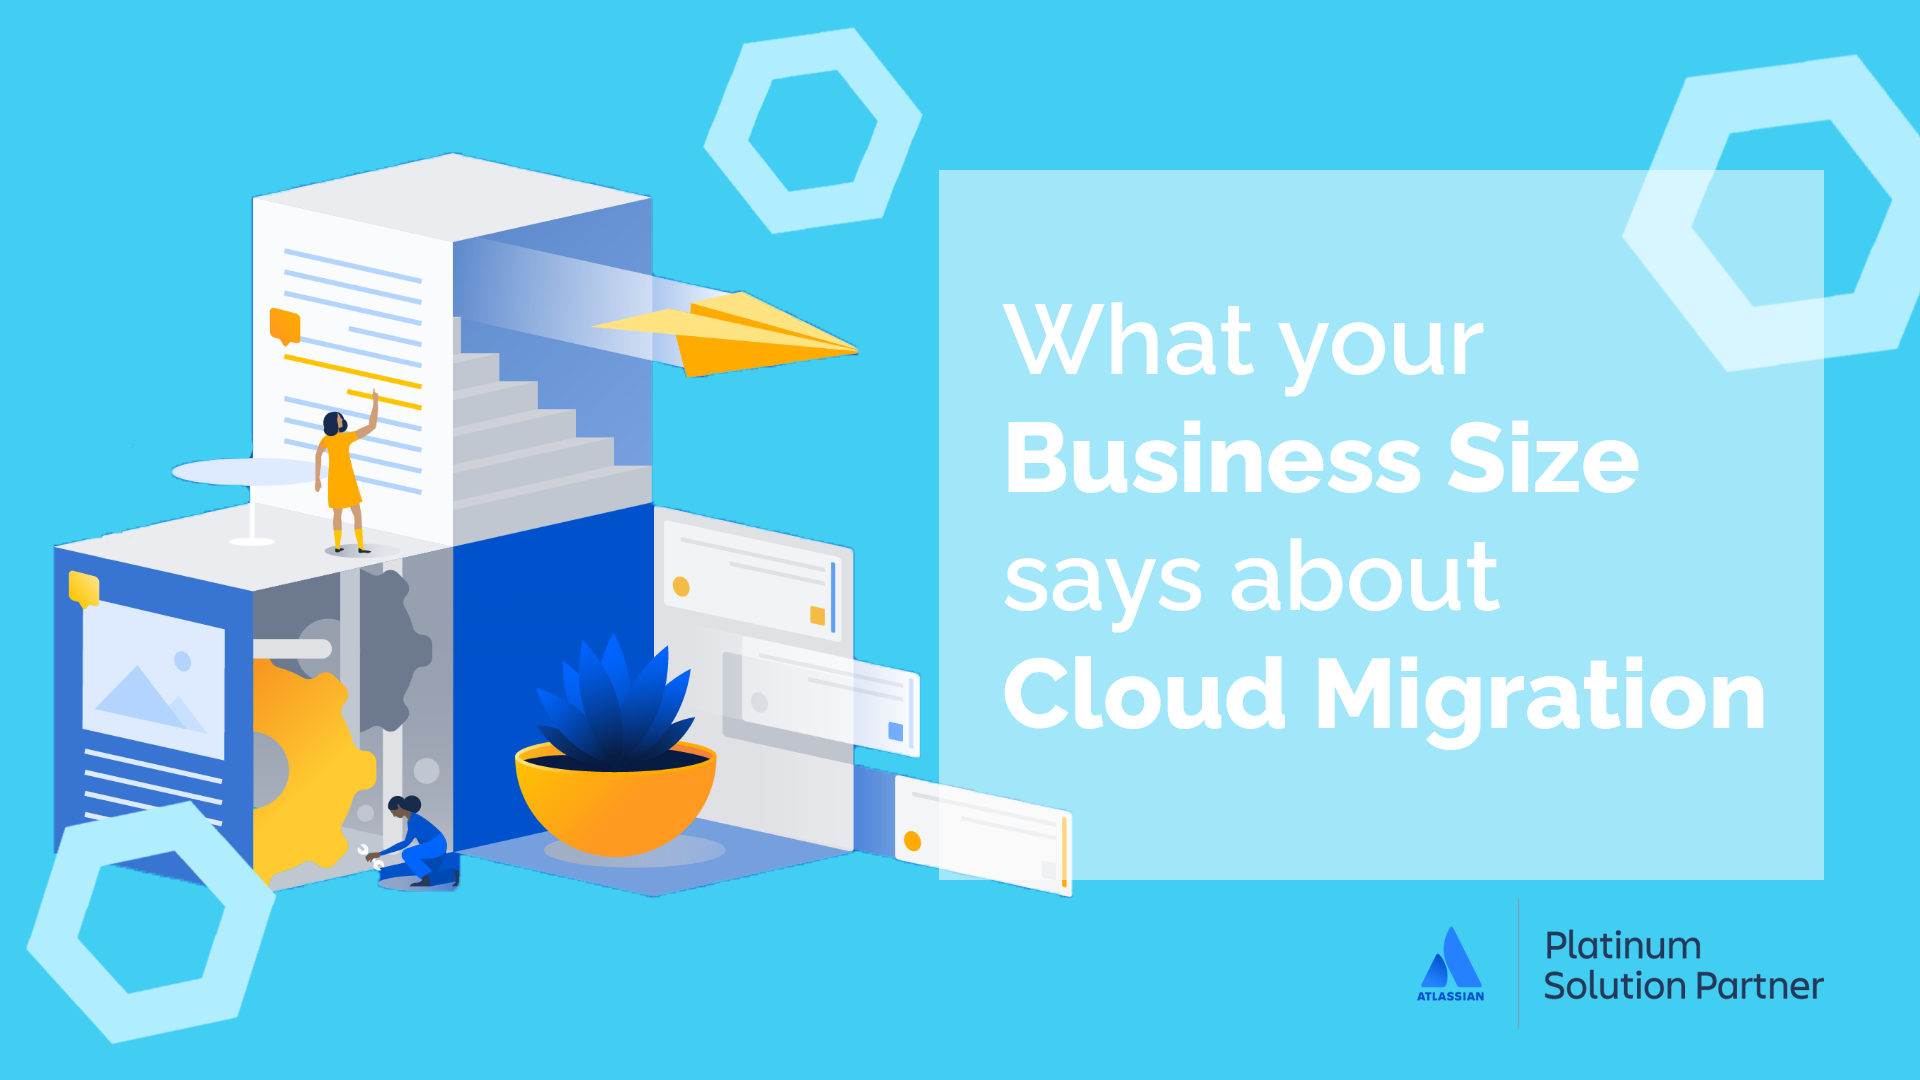 What your Business Size says about Cloud Migration